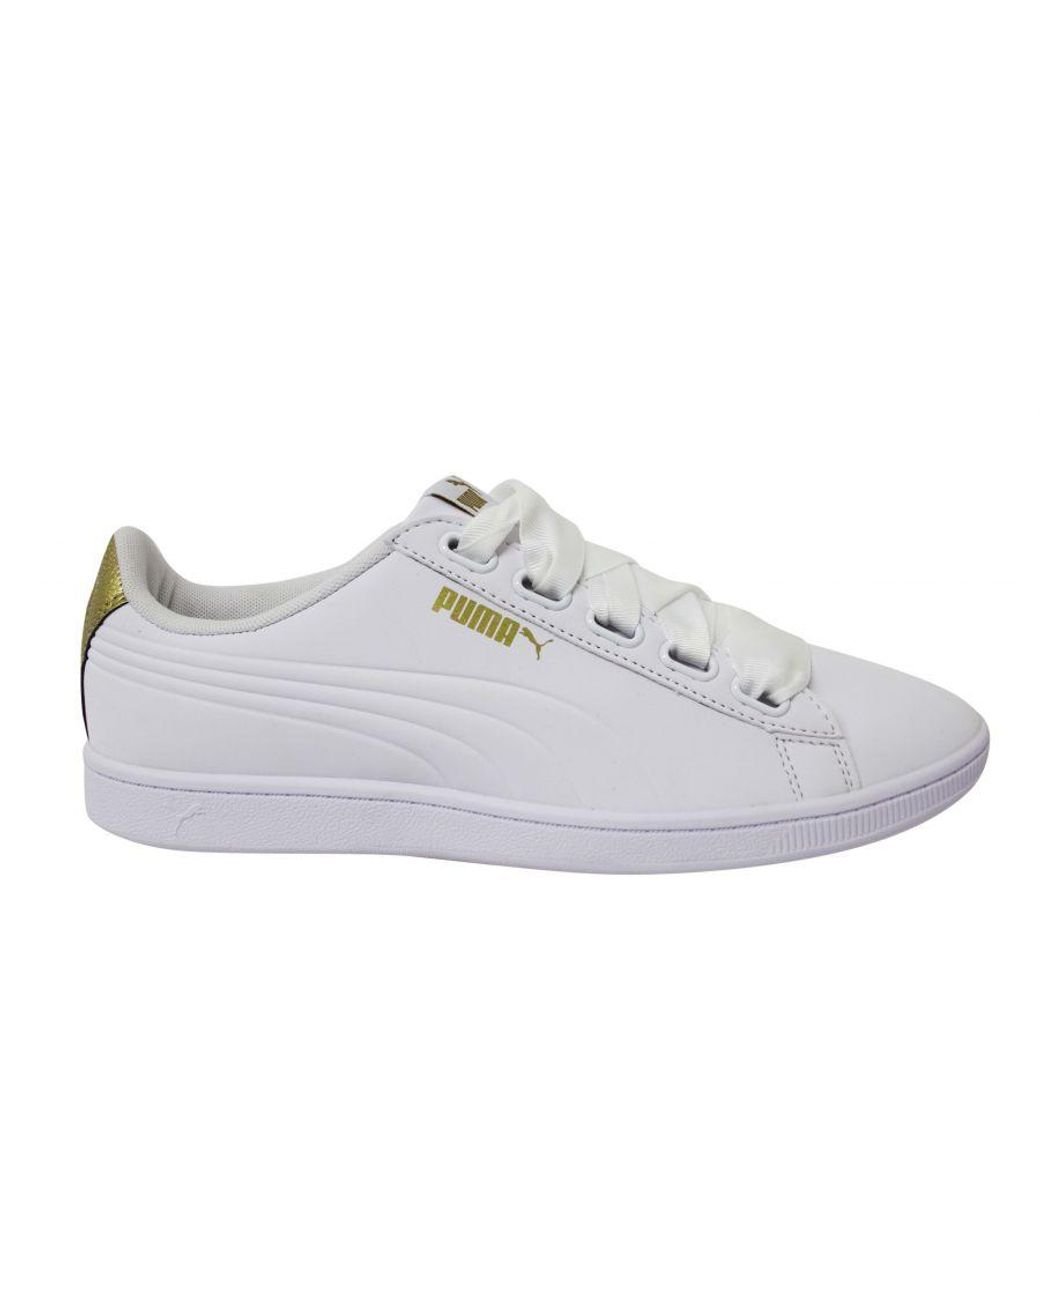 PUMA Vikky Ribbon Vt White Synthetic Lace Up Trainers 367658 01 | Lyst UK